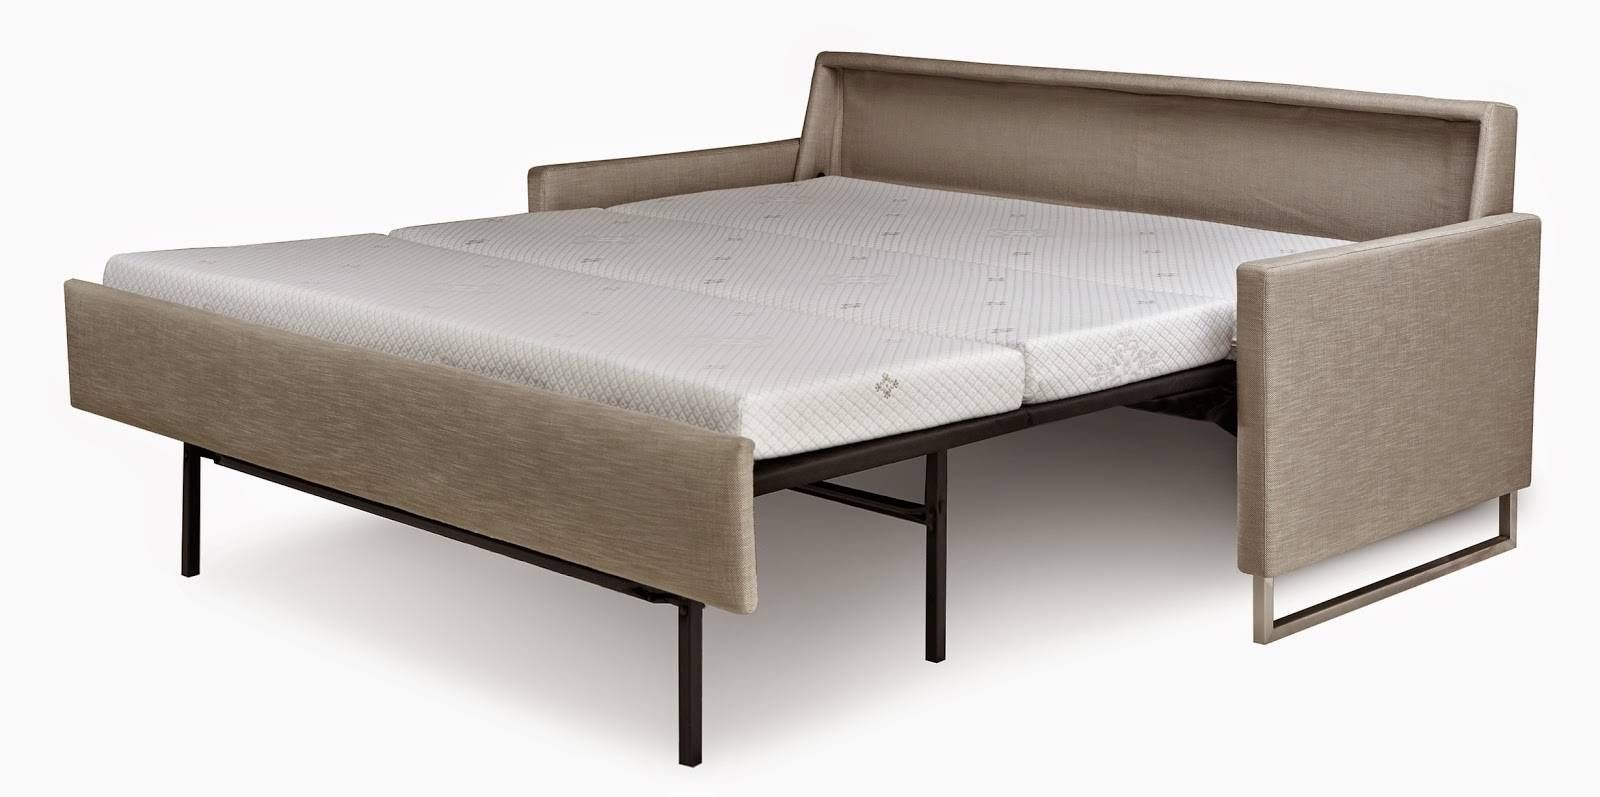 Furniture: Castro Convertible Bed For Exciting Sofabed Design Intended For Castro Convertible Sofas (View 4 of 15)